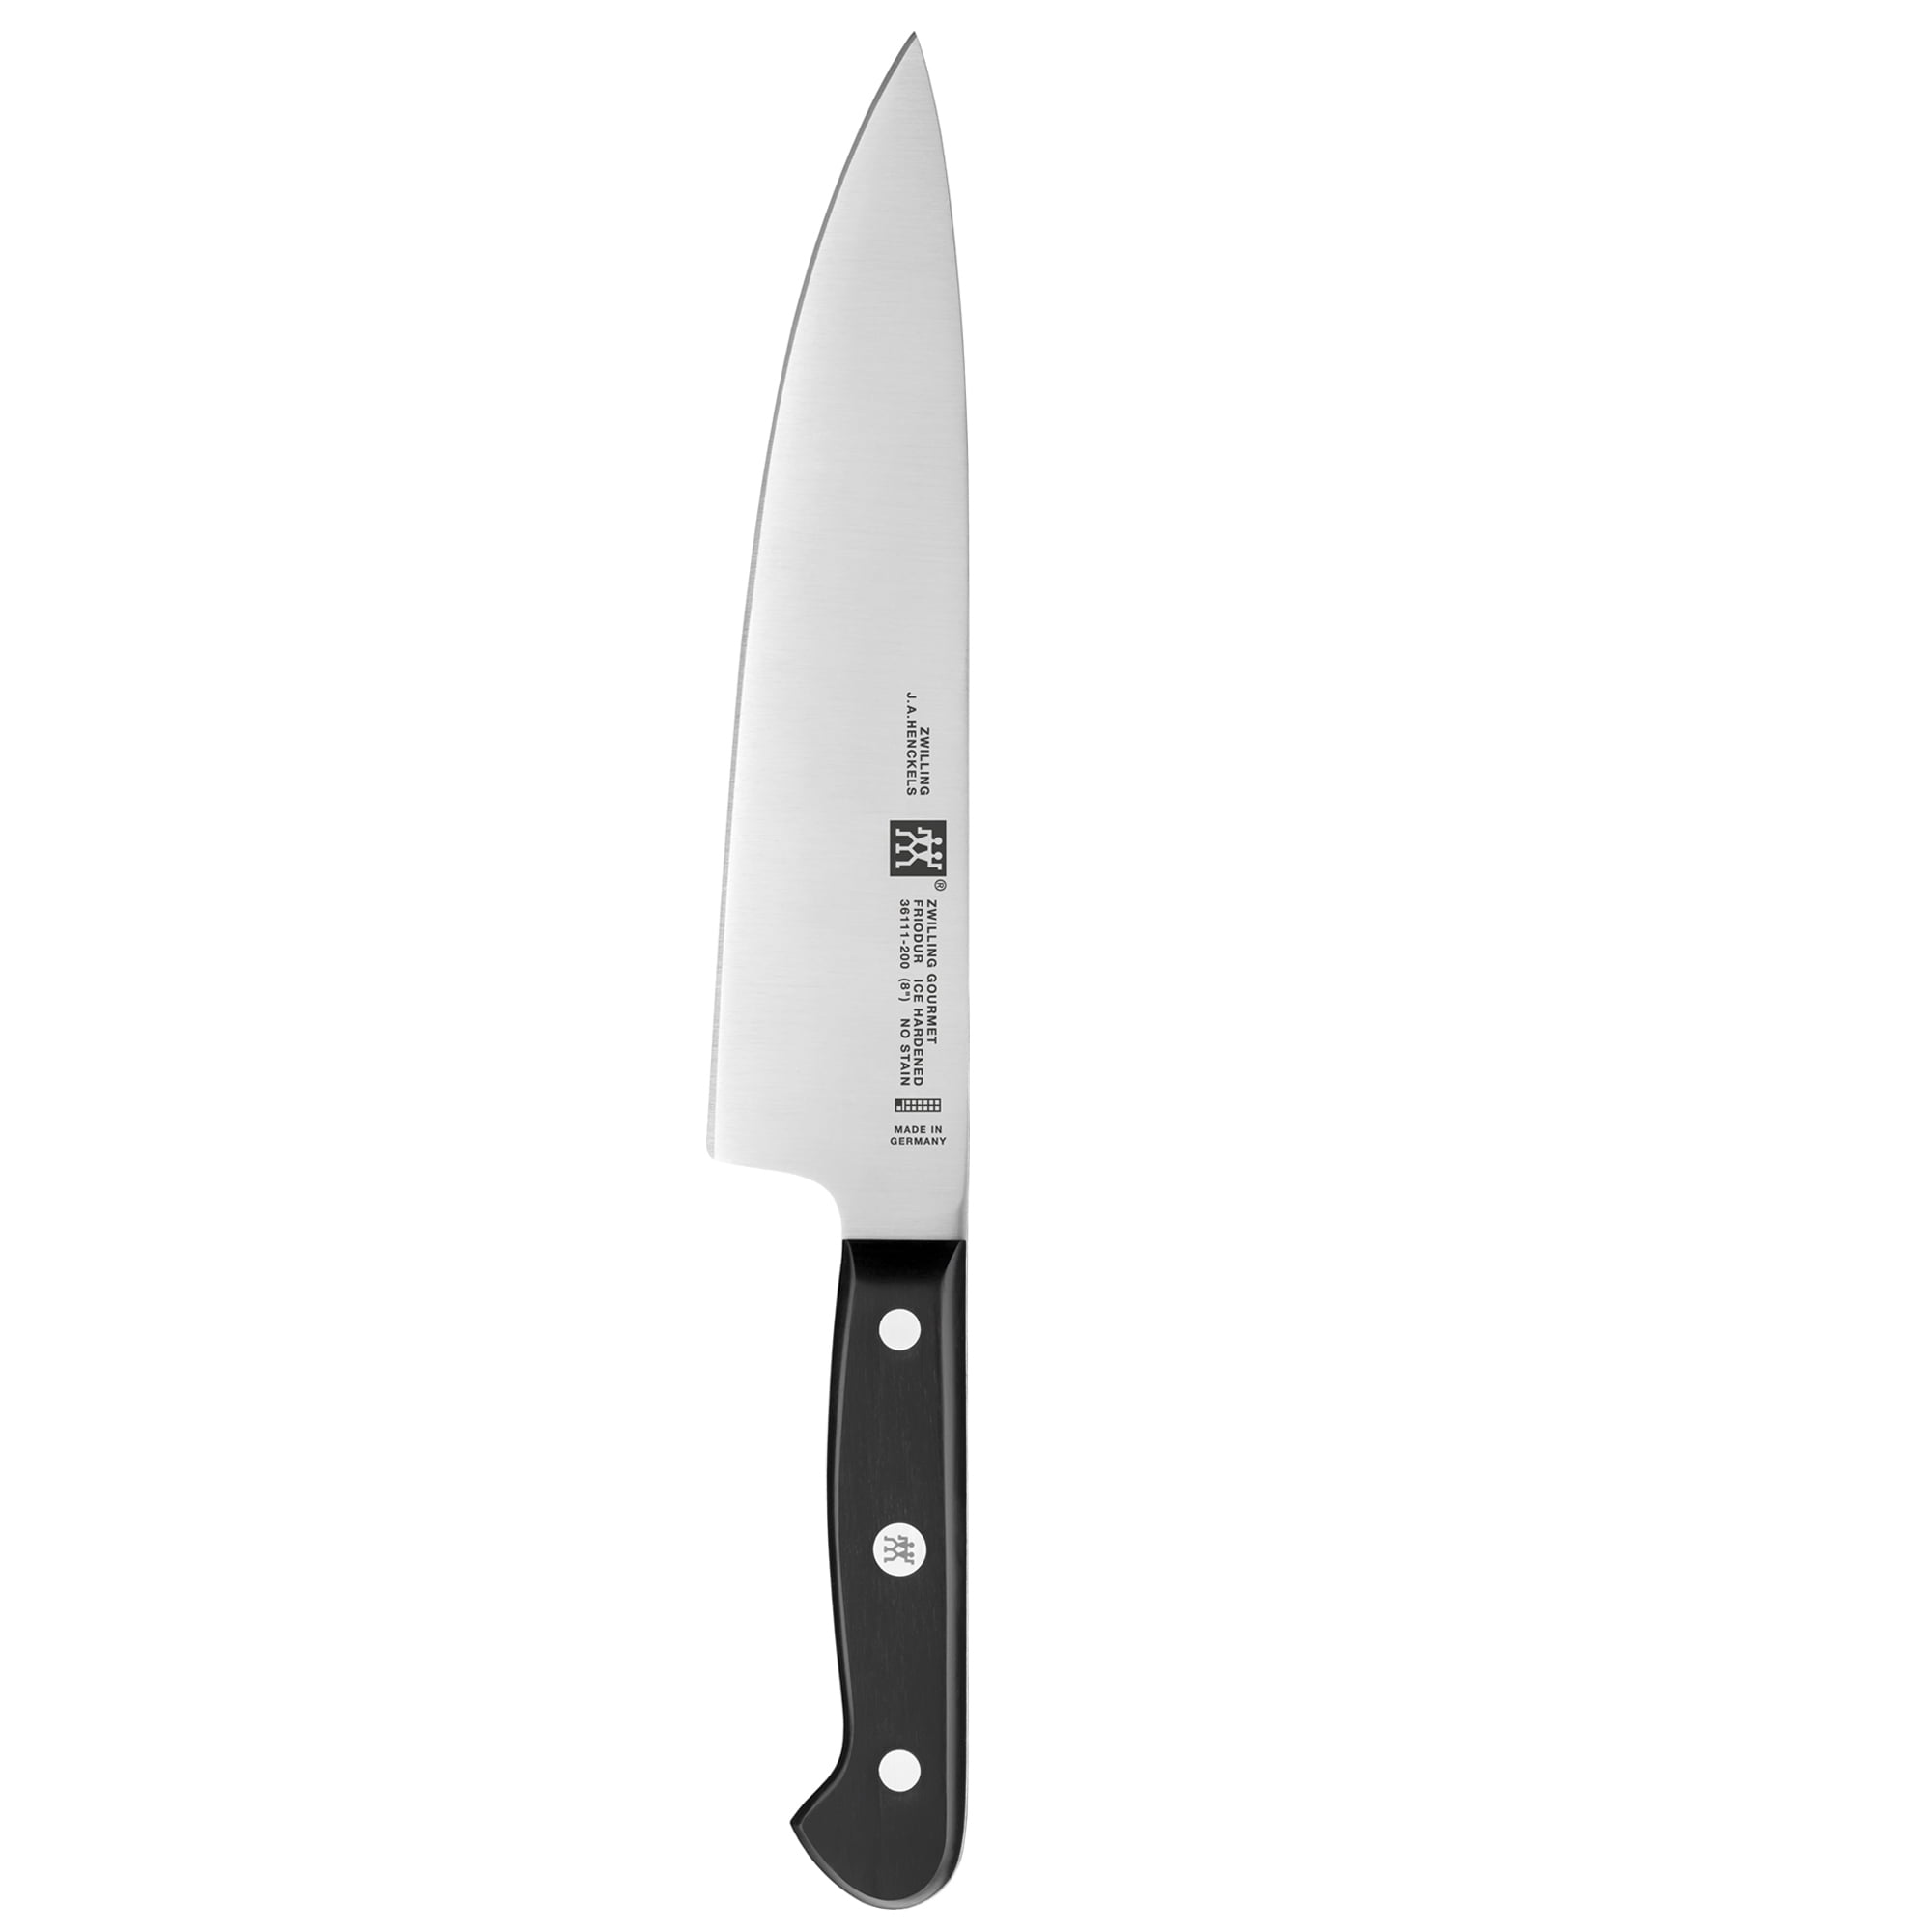 KRAMER by ZWILLING EUROLINE Carbon Collection 2.0 8-inch Chef's